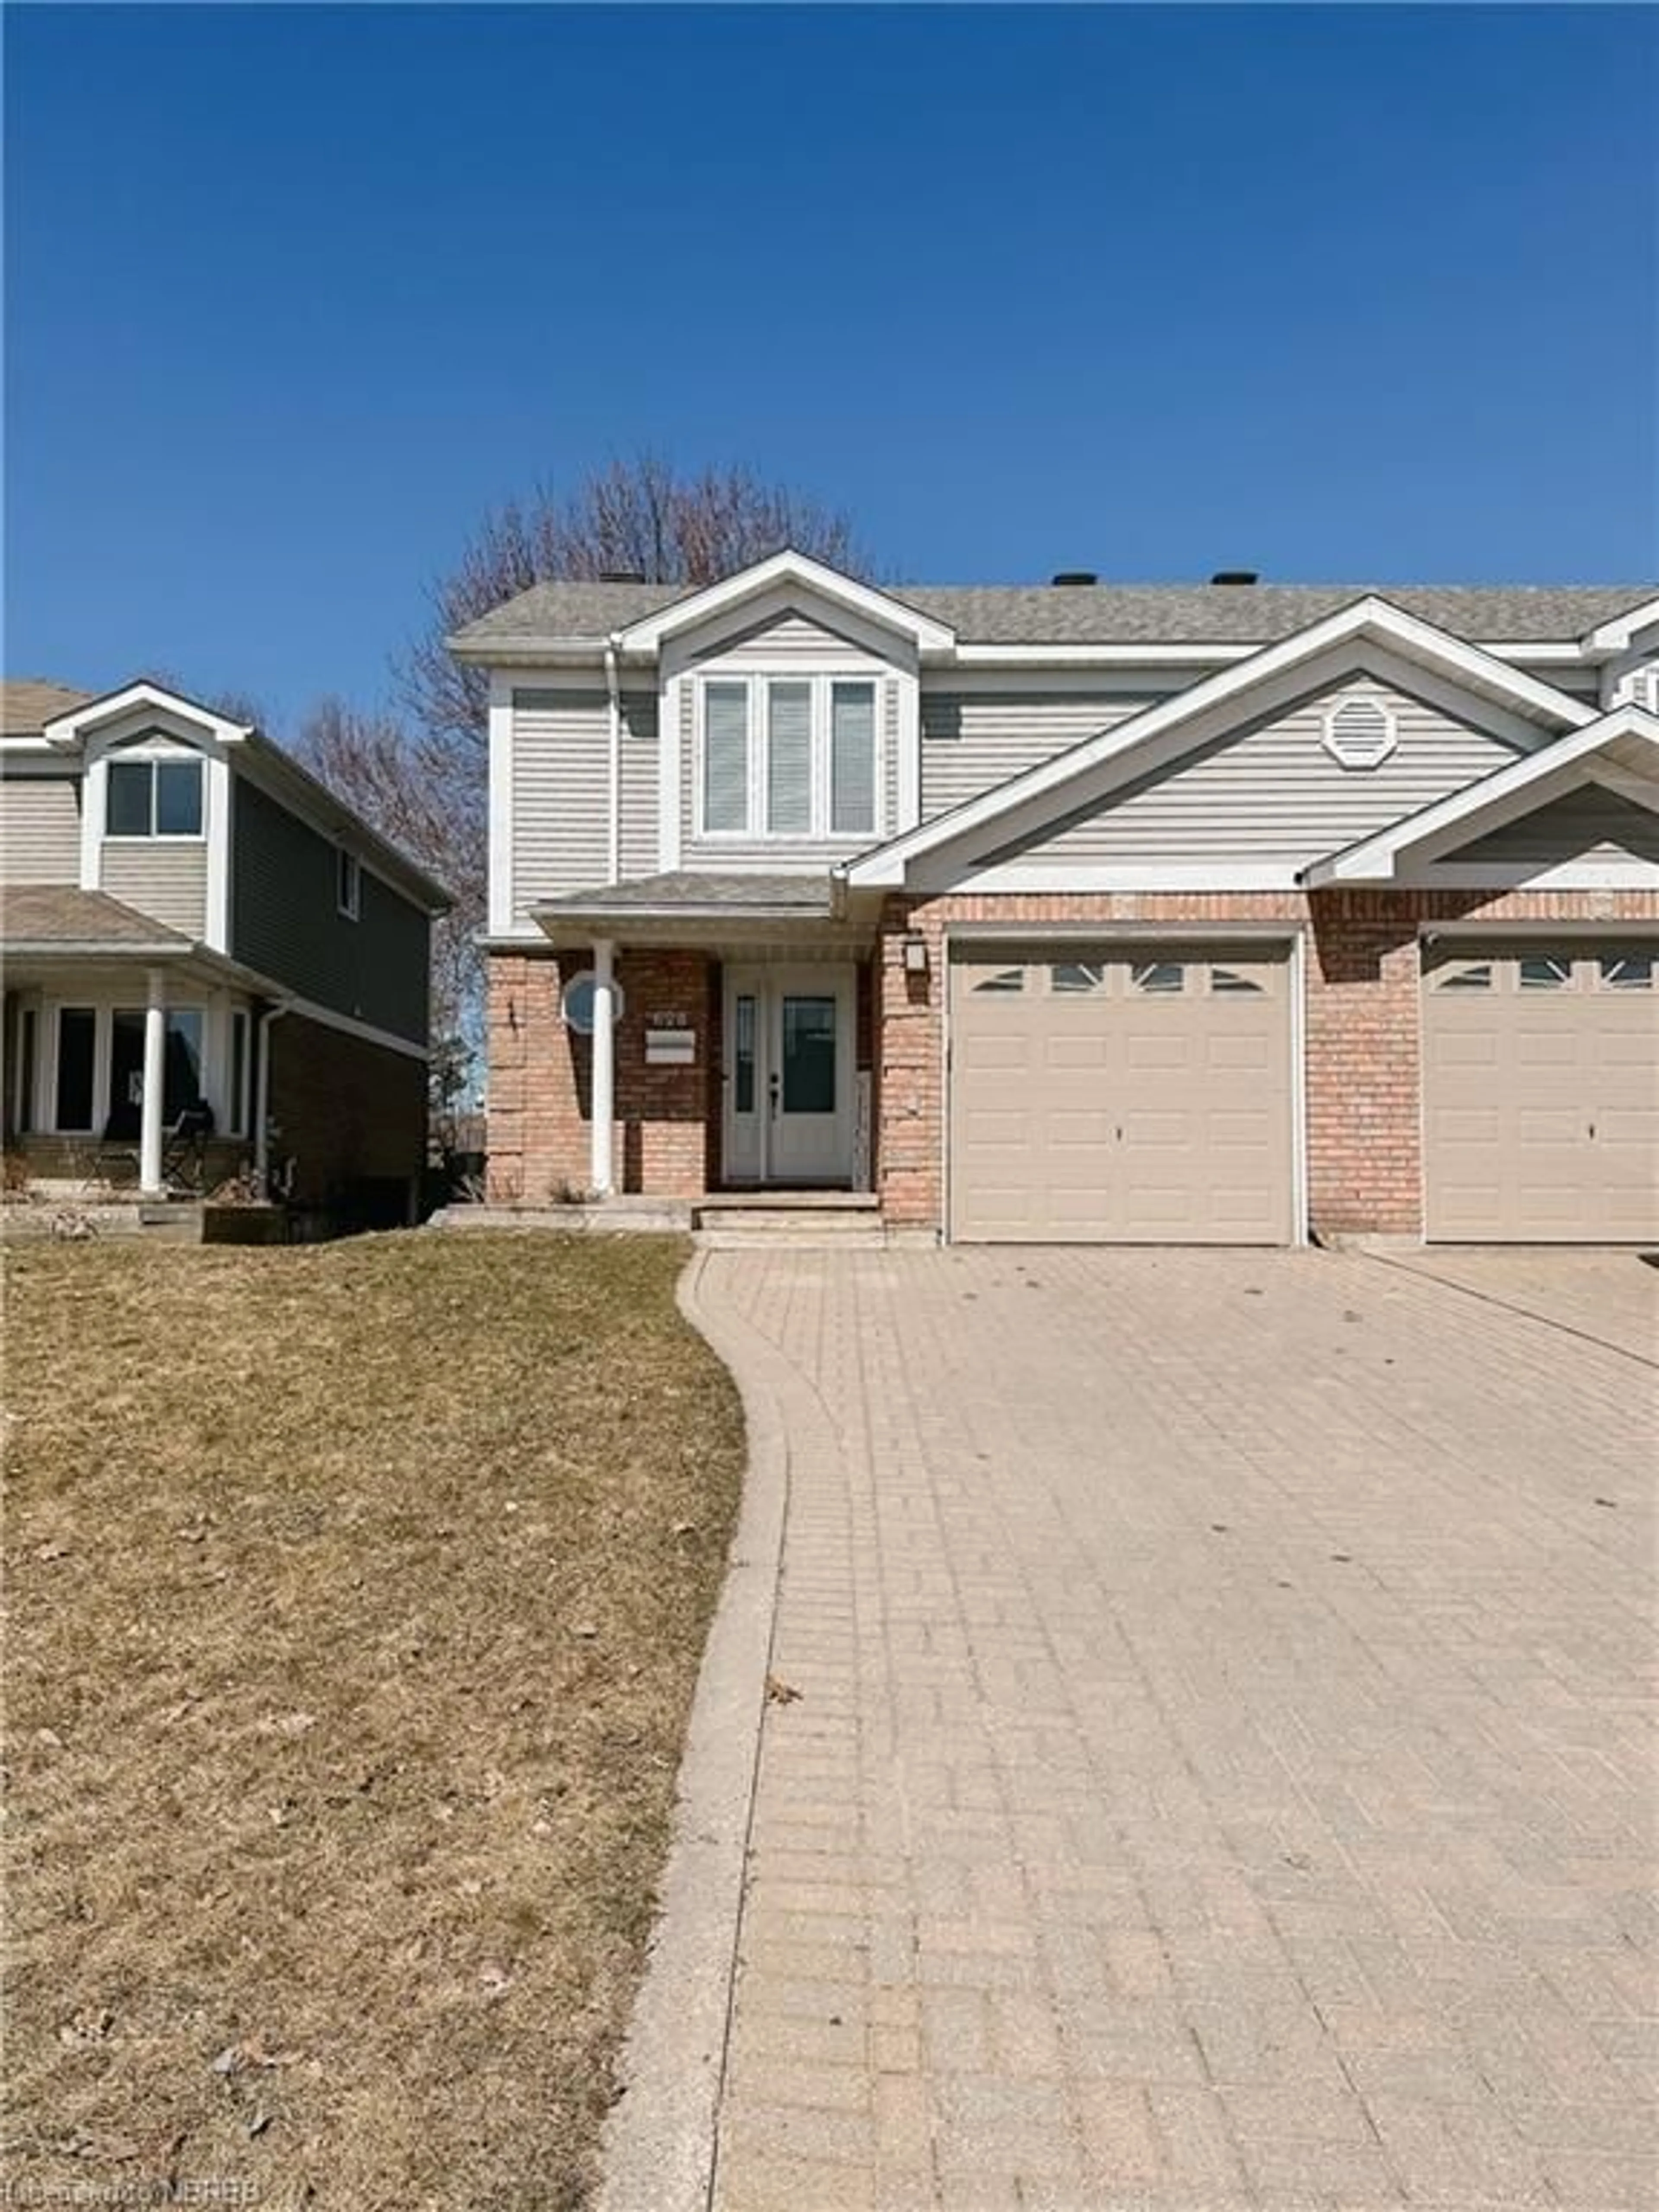 Home with brick exterior material for 628 Tackaberry Dr, North Bay Ontario P1B 9L1